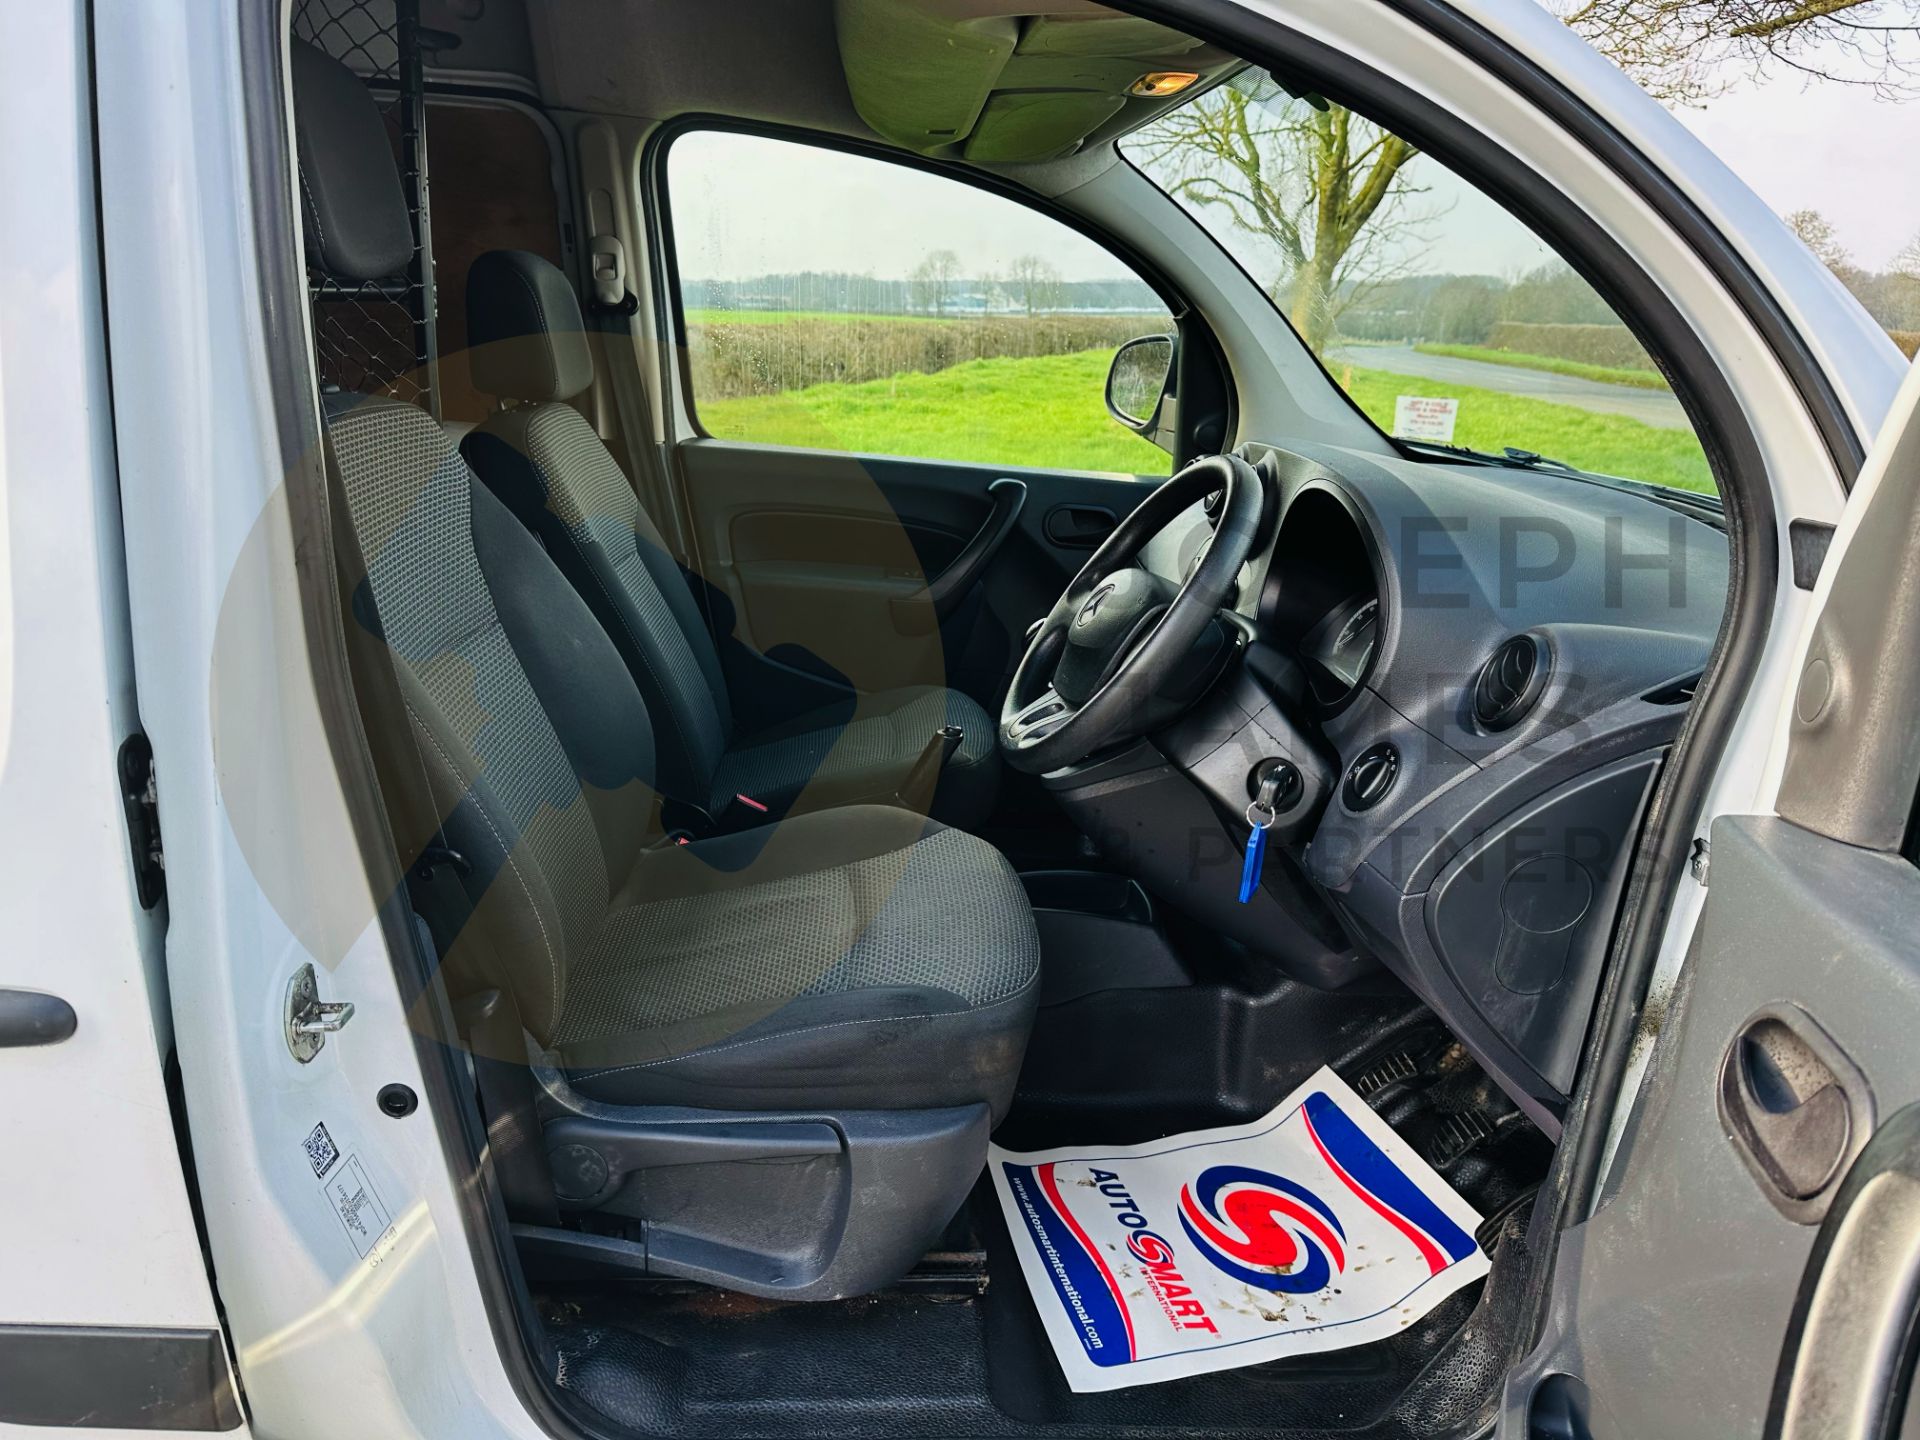 (On Sale) MERCEDES CITAN 111CDI "LWB" 2019 MODEL - AIR CON - EURO 6 - ELECTRIC PACK - NO VAT!!! - Image 18 of 28